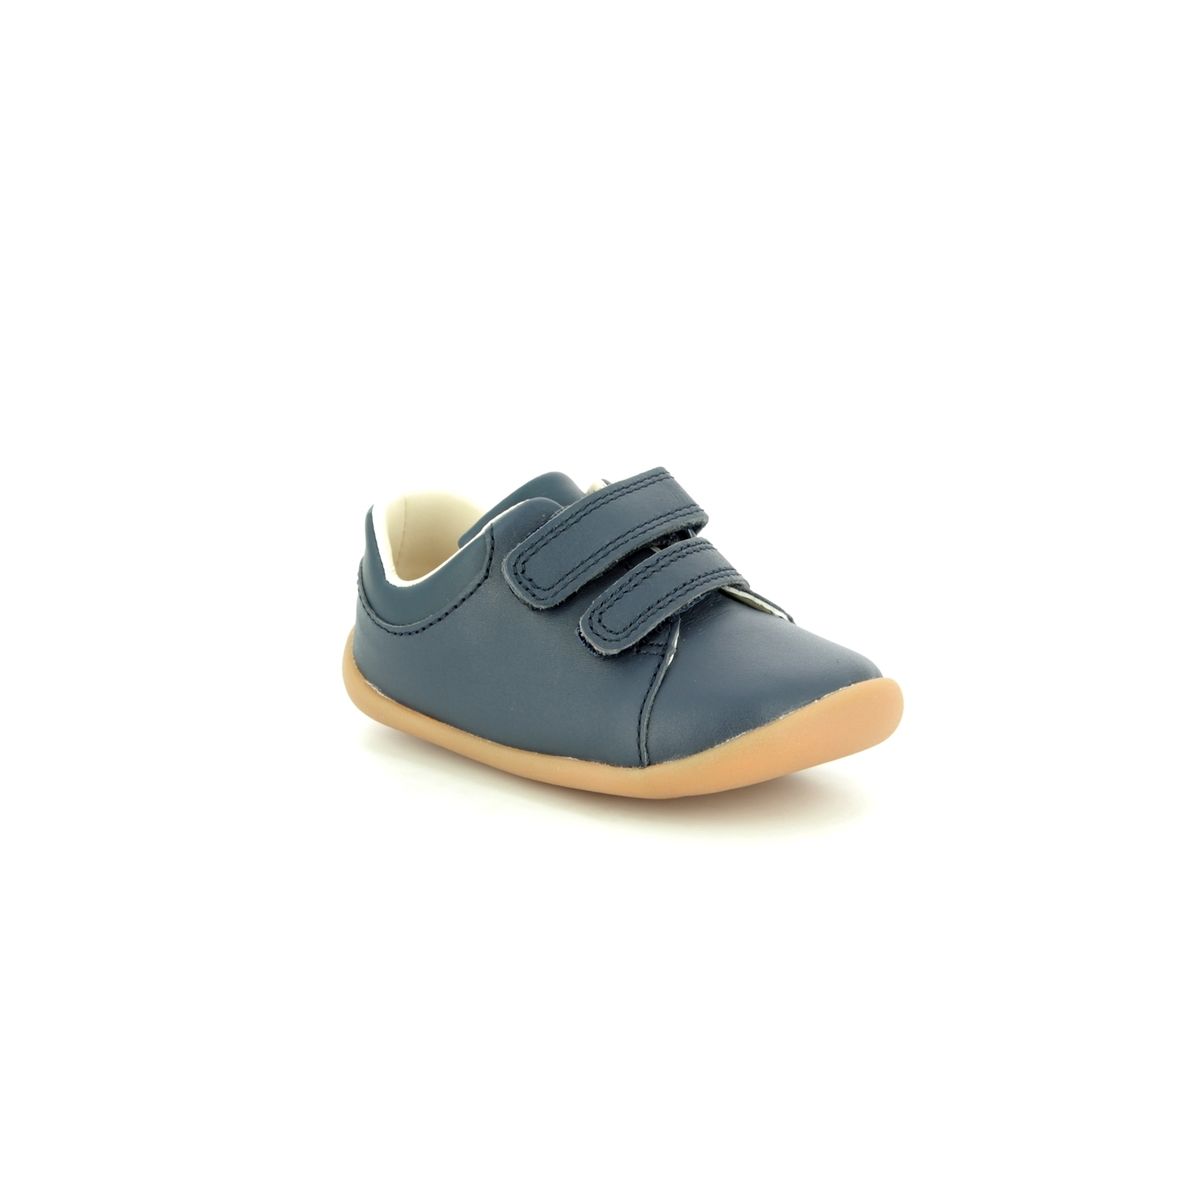 Clarks Roamer Craft T Navy Leather Kids Boys First And Toddler 422866F In Size 2 In Plain Navy Leather F Width Fitting Regular Fit